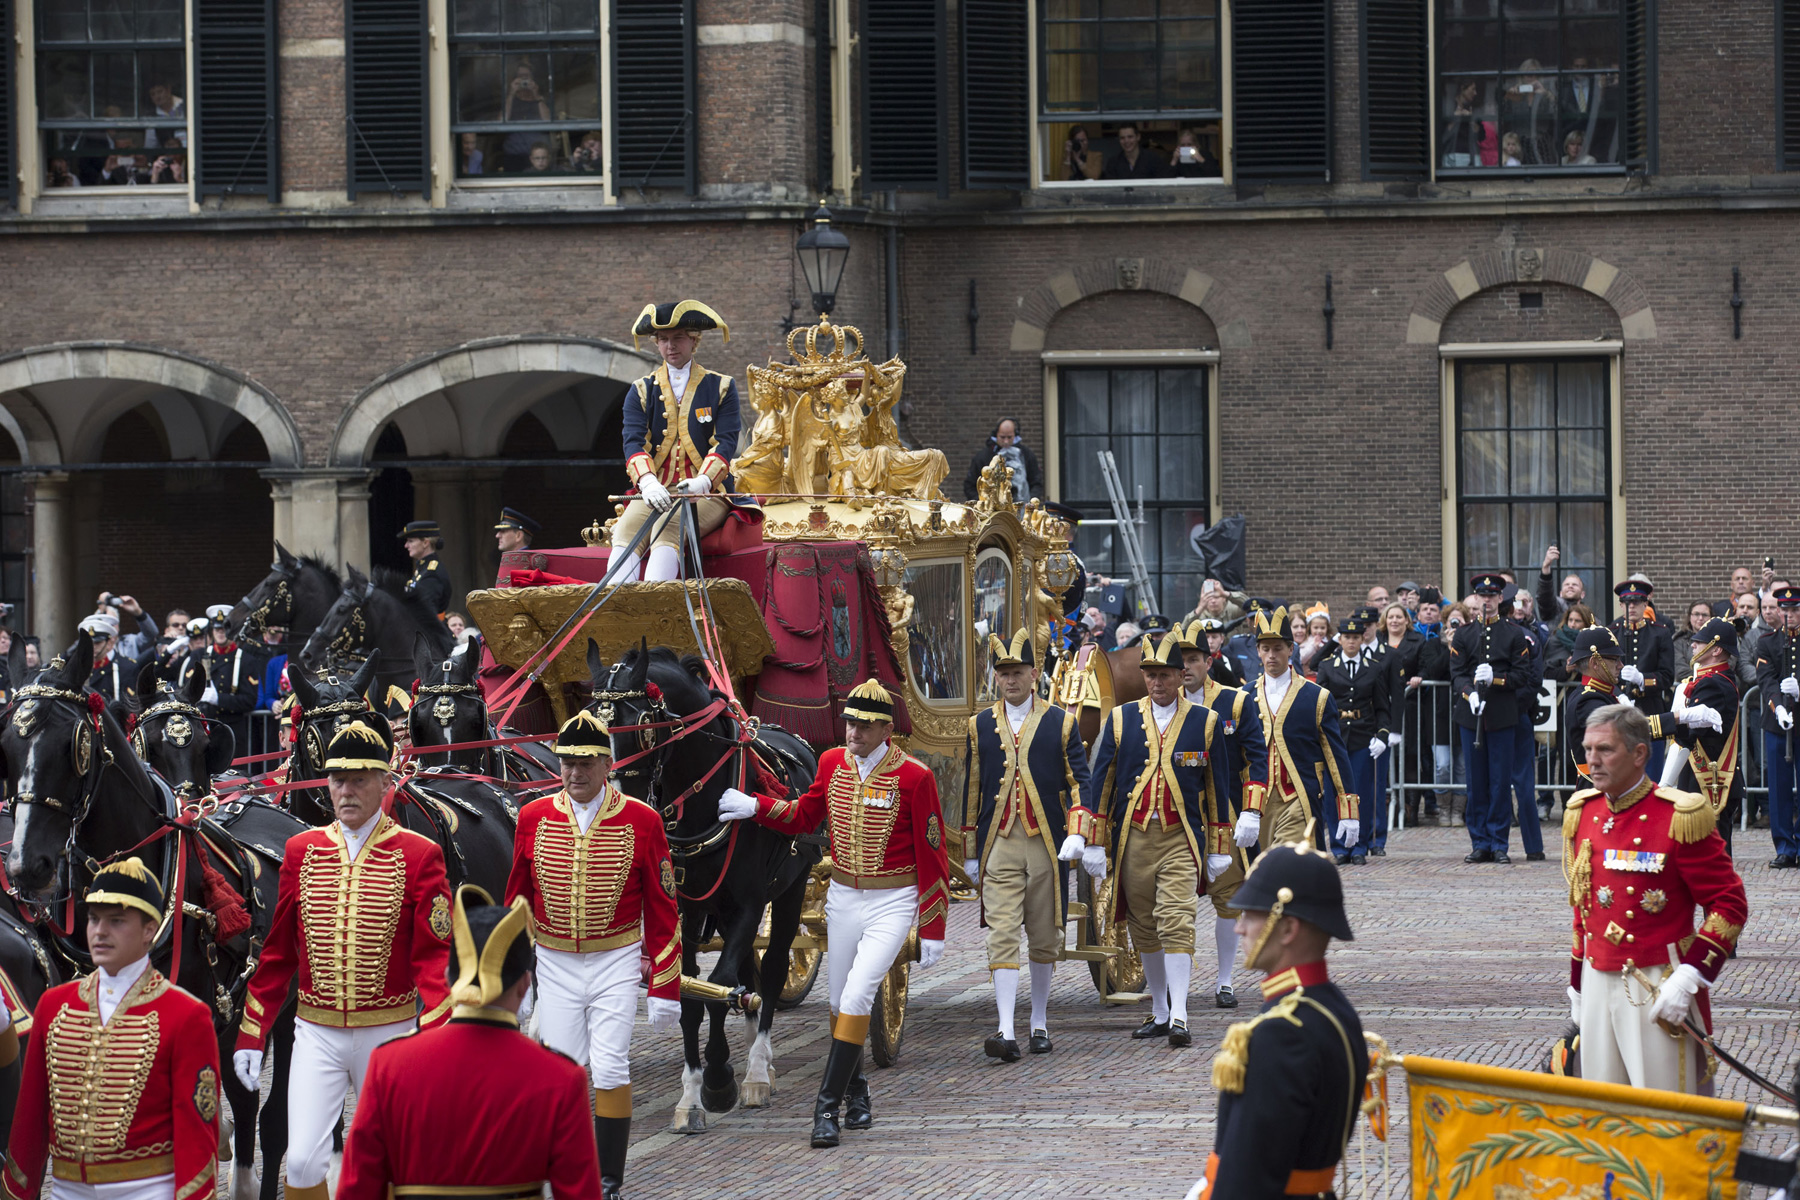 The golden chariot arrives carrying King Willem-Alexander and Queen Maxima of The Netherlands arrives at the Ridderzaal during celebrations for Prinsjesdag (Prince's Day) on September 17, 2013 in The Hague, Netherlands. (Photo by Michel Porro/Getty Images) 